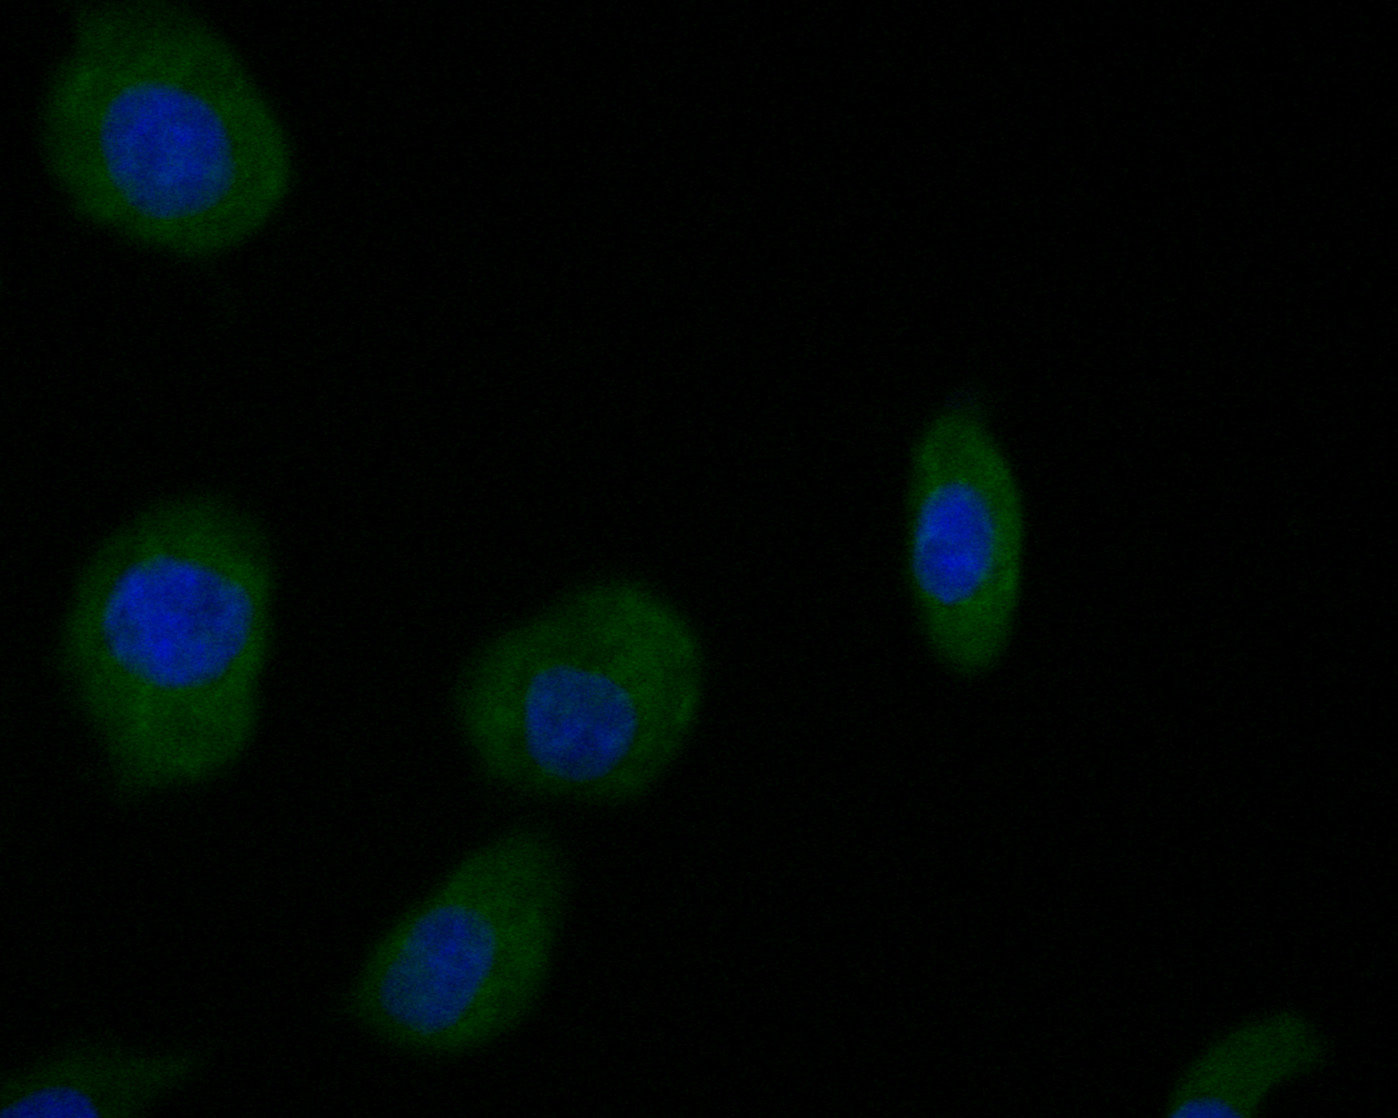 ICC staining of Dopamine Transporter in SKOV-3 cells (green). Formalin fixed cells were permeabilized with 0.1% Triton X-100 in TBS for 10 minutes at room temperature and blocked with 1% Blocker BSA for 15 minutes at room temperature. Cells were probed with the primary antibody (HA500007, 1/200) for 1 hour at room temperature, washed with PBS. Alexa Fluor®488 Goat anti-Rabbit IgG was used as the secondary antibody at 1/1,000 dilution. The nuclear counter stain is DAPI (blue).